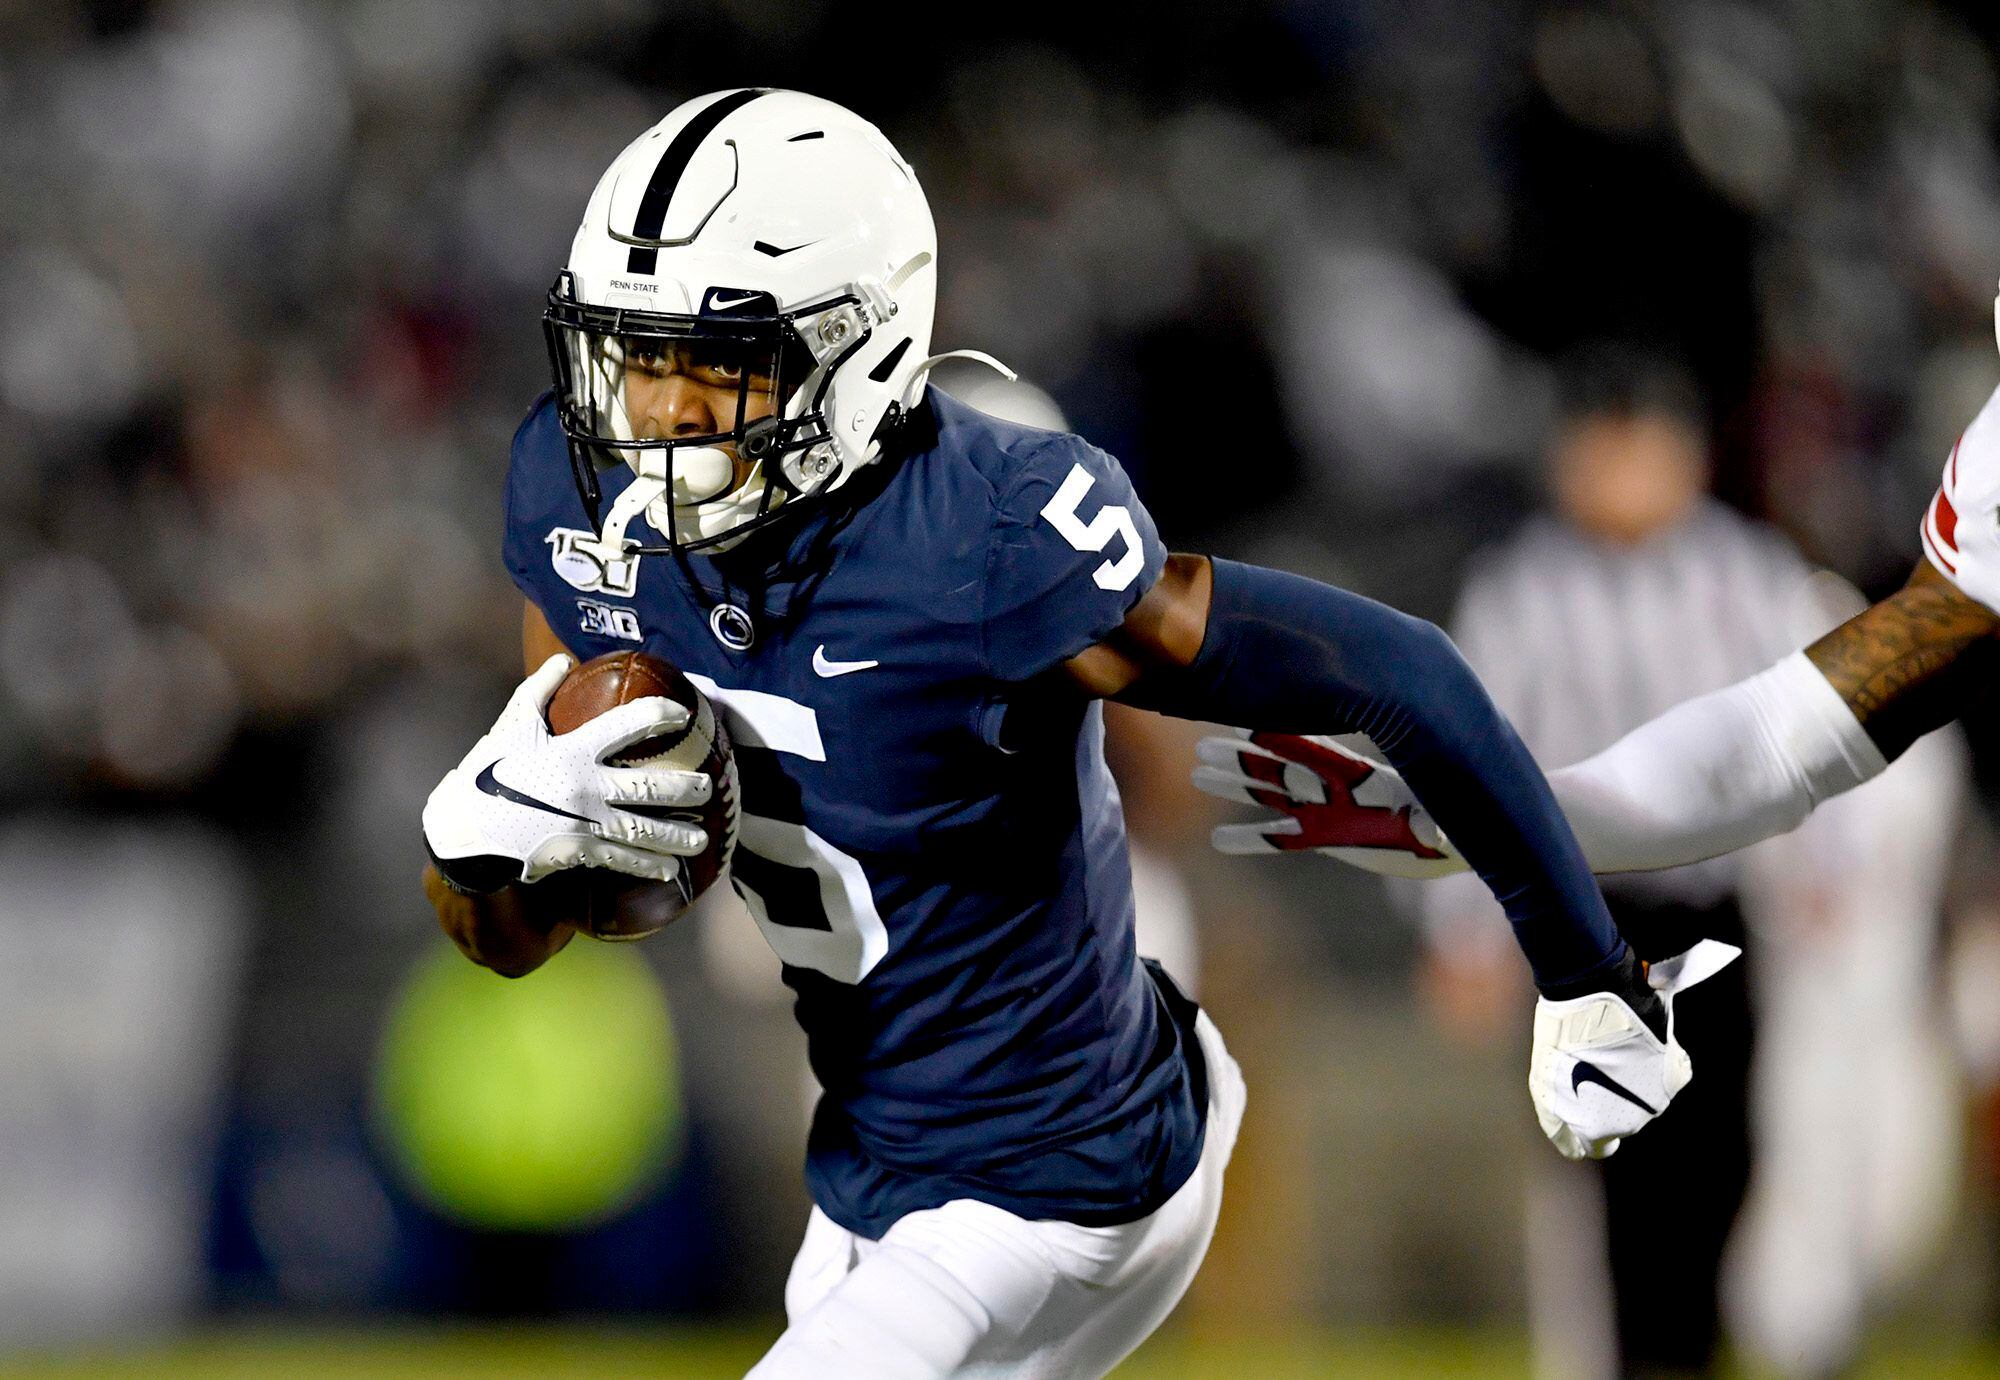 Penn State's Jahan Dotson ready to become the team's next go-to